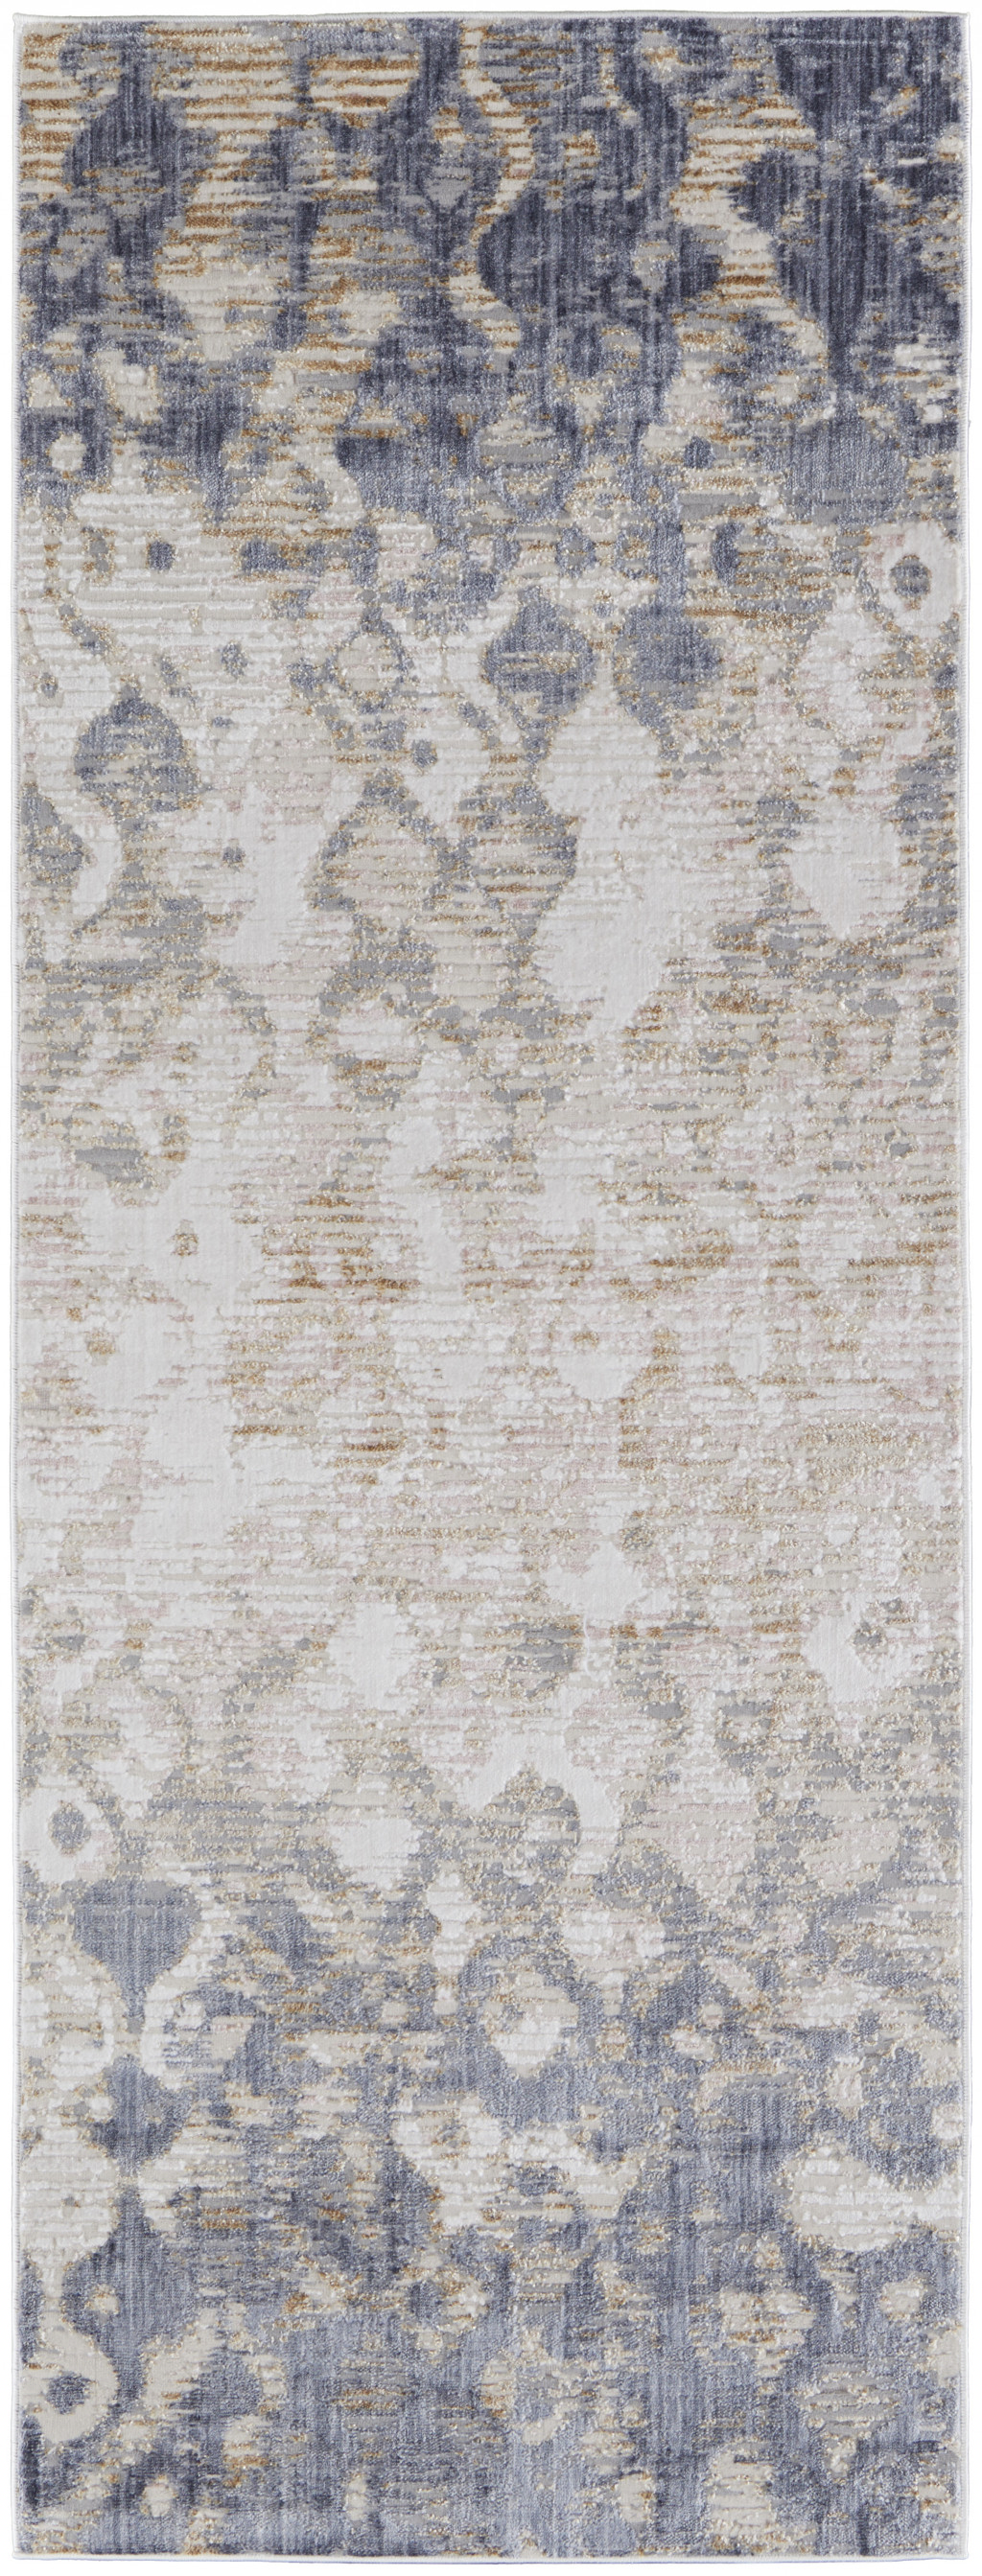 10' Tan Ivory And Blue Abstract Power Loom Distressed Runner Rug-514162-1